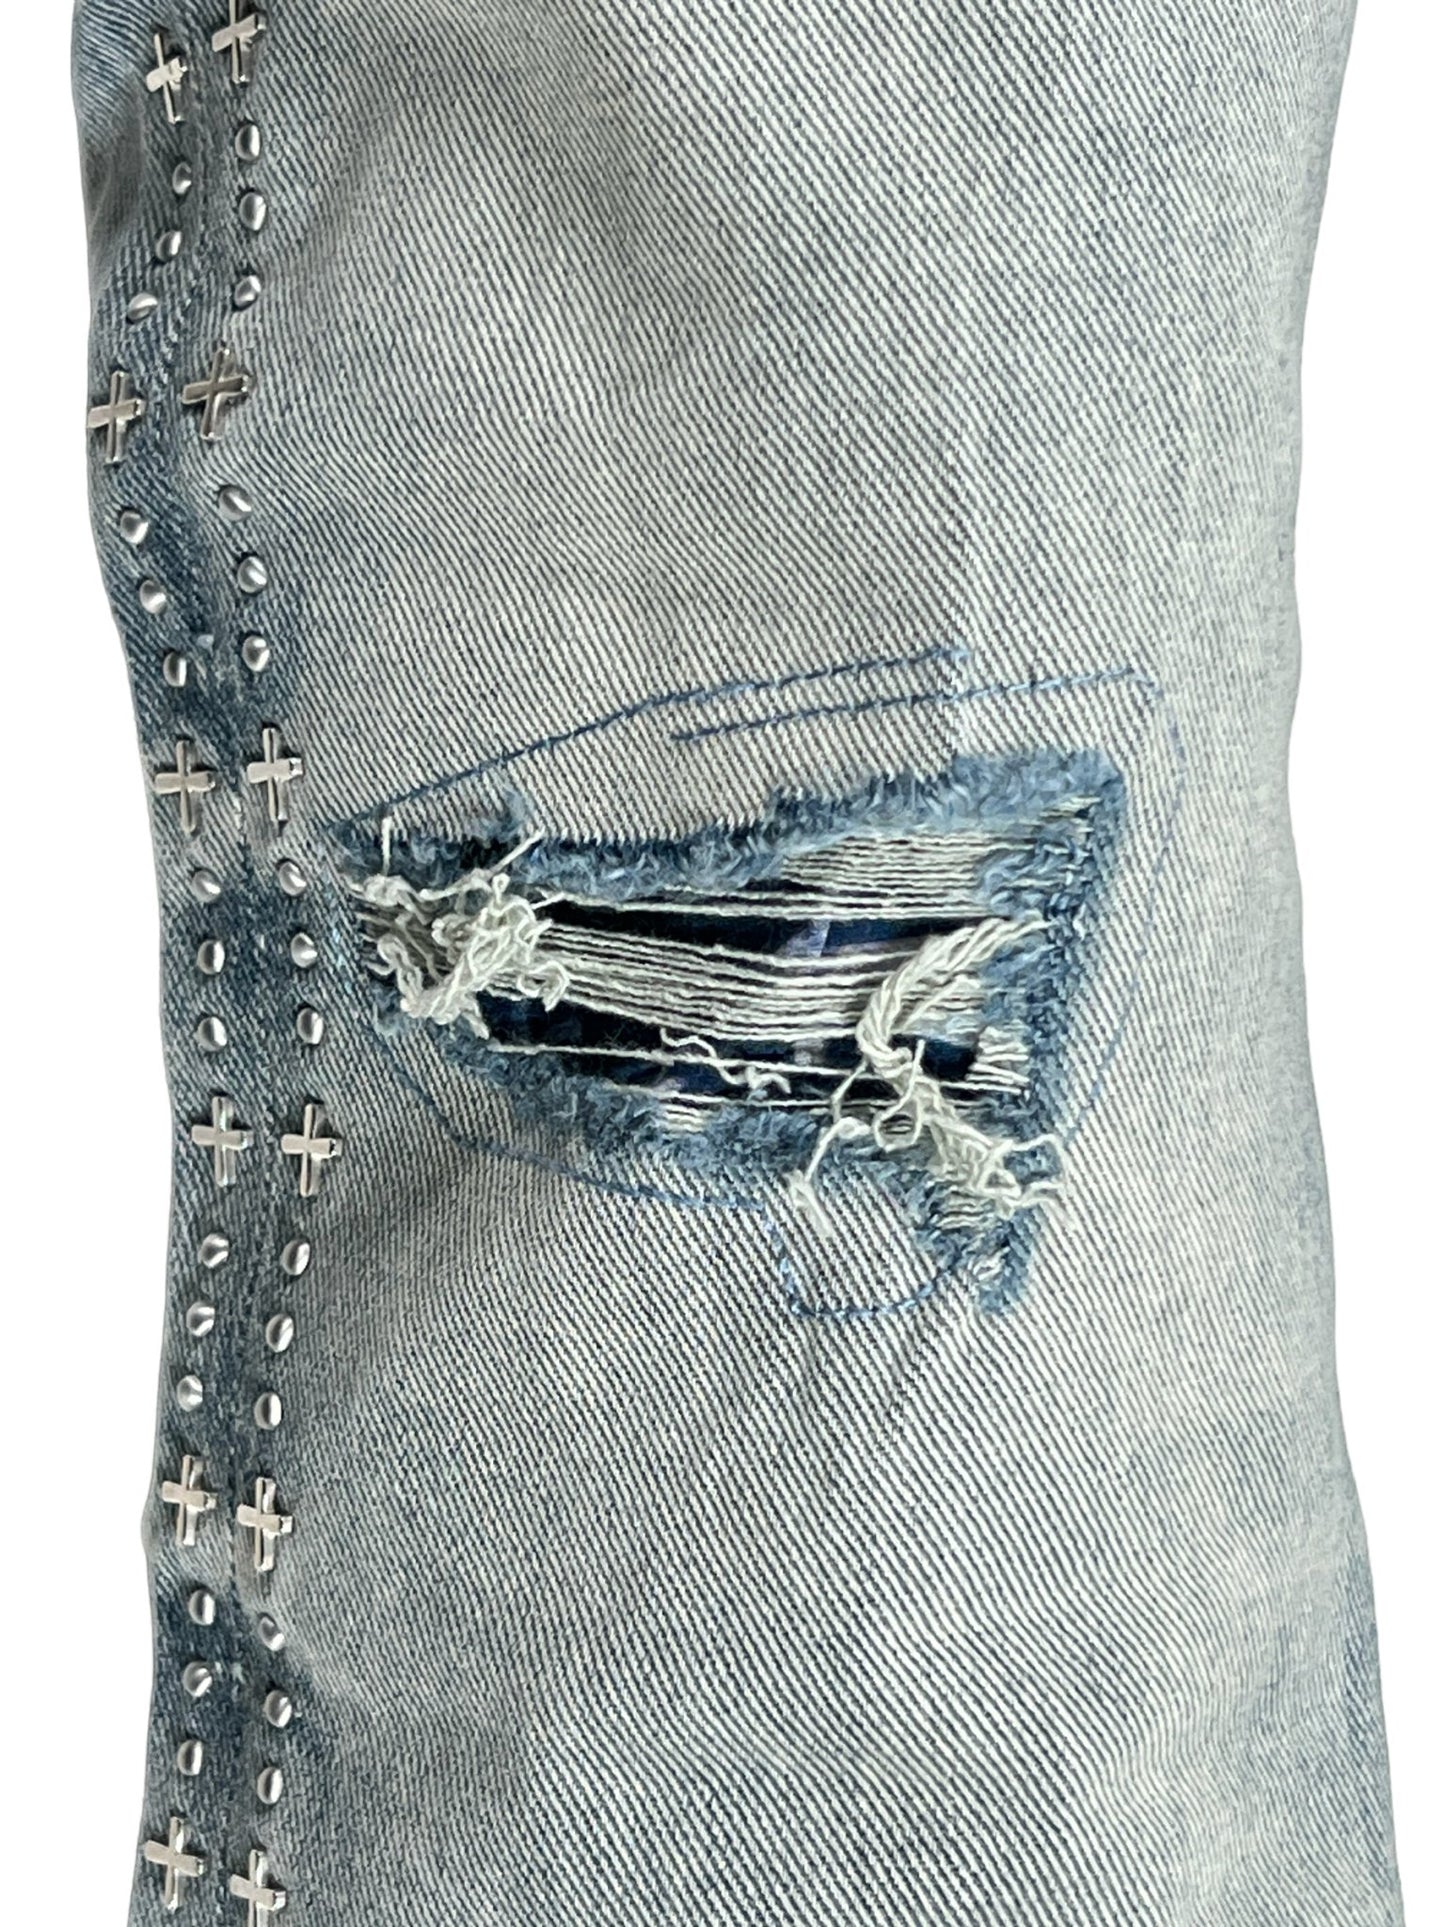 Close-up of a distressed KSUBI BRONKO DYANAMITE METAL DENIM fabric with a ripped patch and metal stud embellishments.